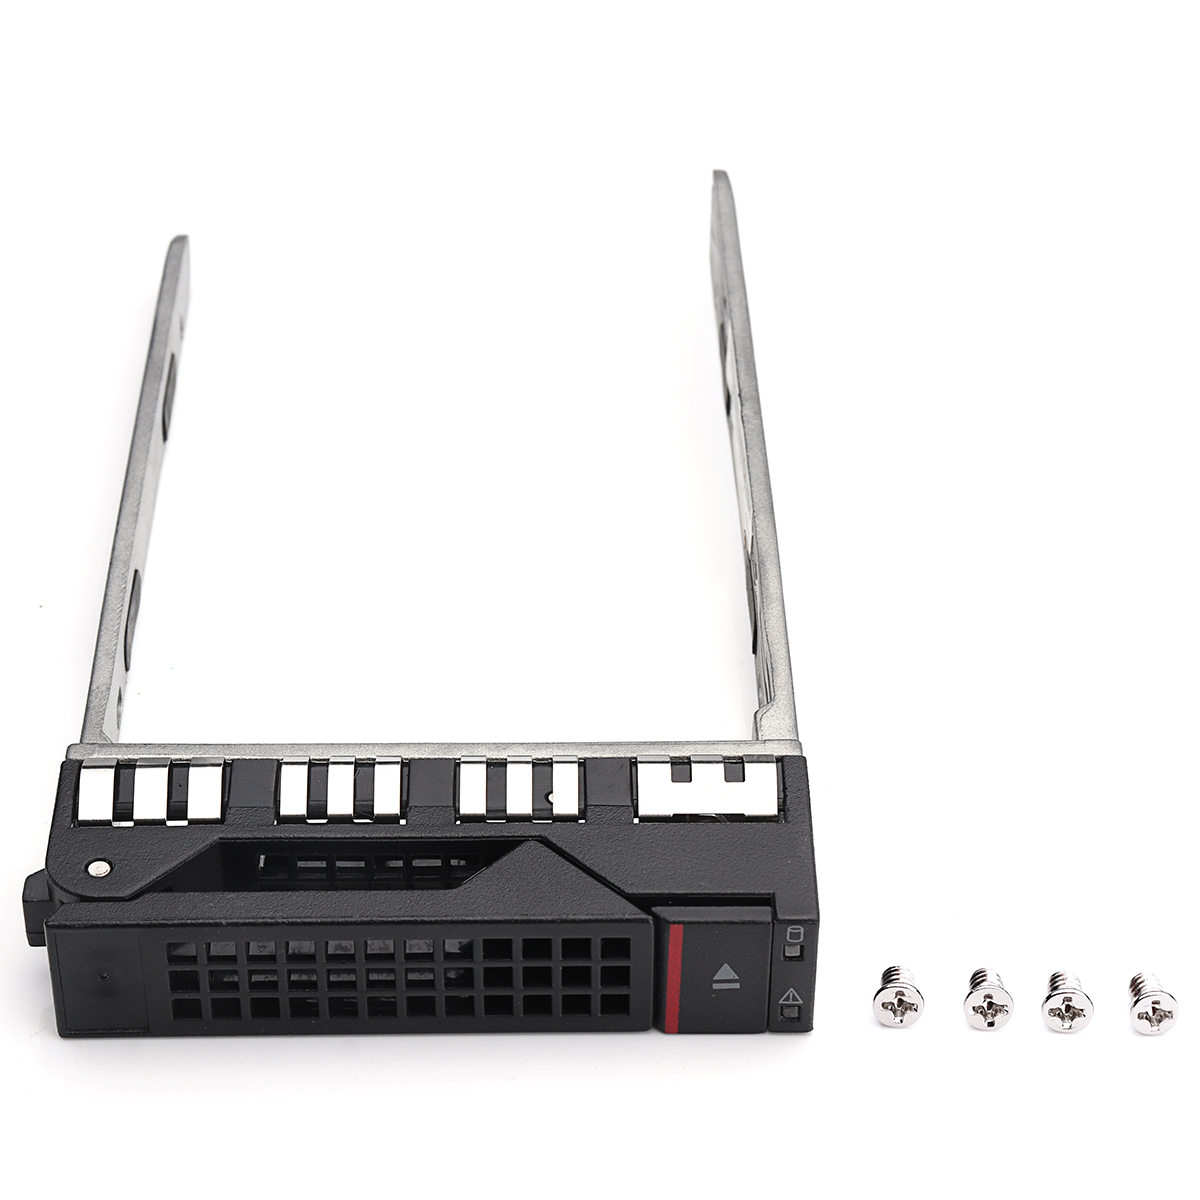 Find 2 5inch Hard Drive Tray Caddy SSD HDD Bracket Rack for Lenovo RD330 for Sale on Gipsybee.com with cryptocurrencies